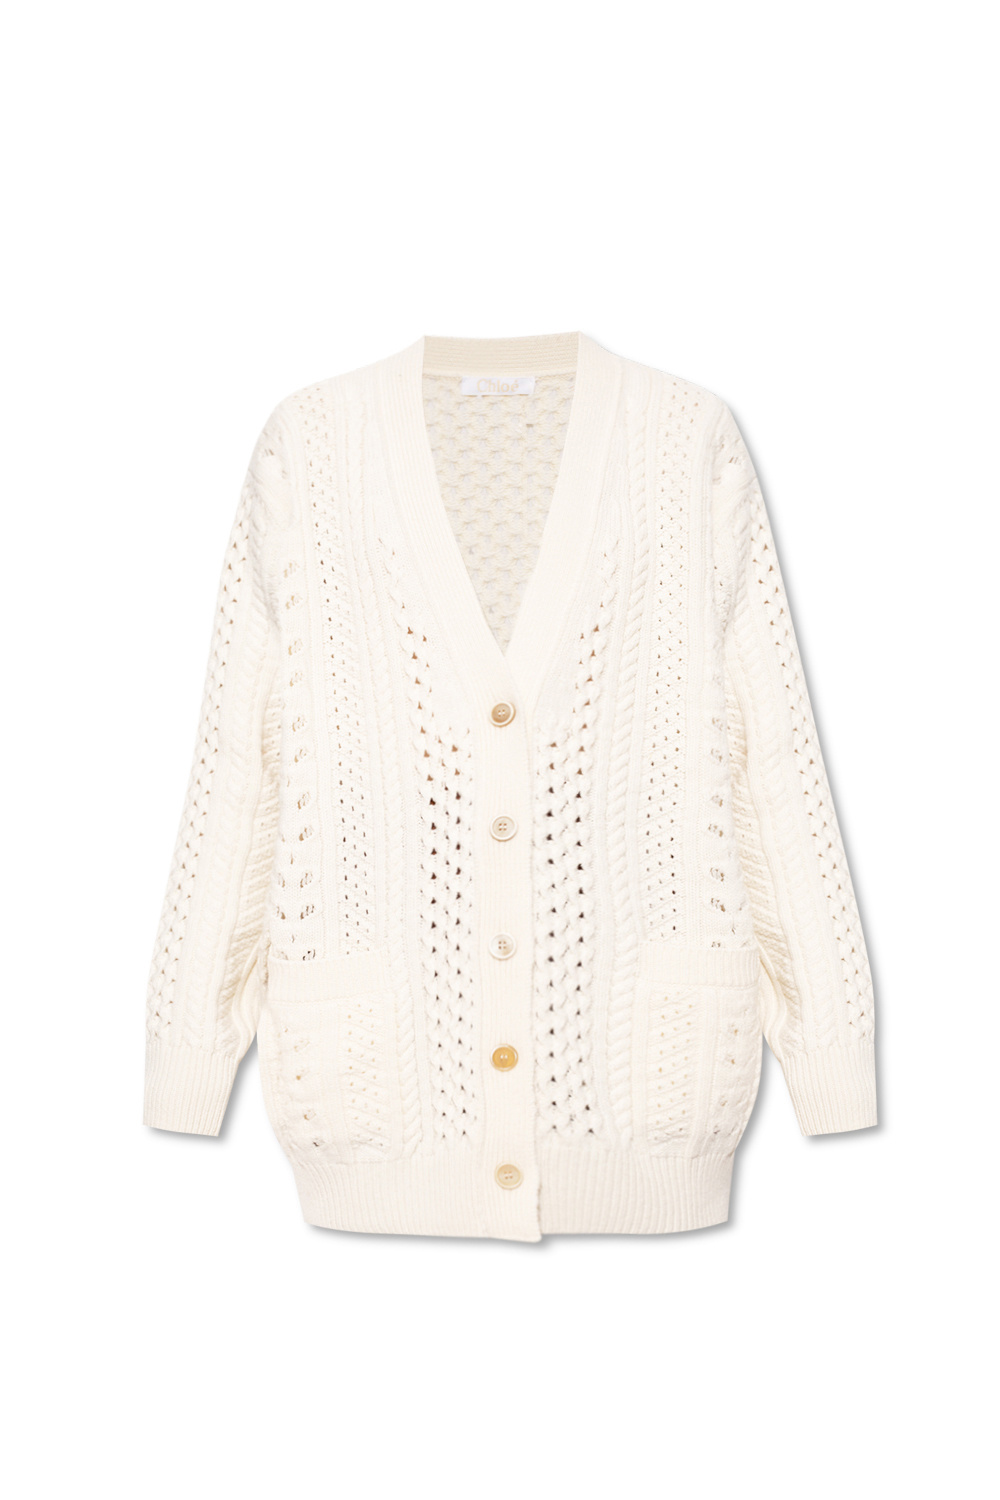 Chloé Cardigan with buttons